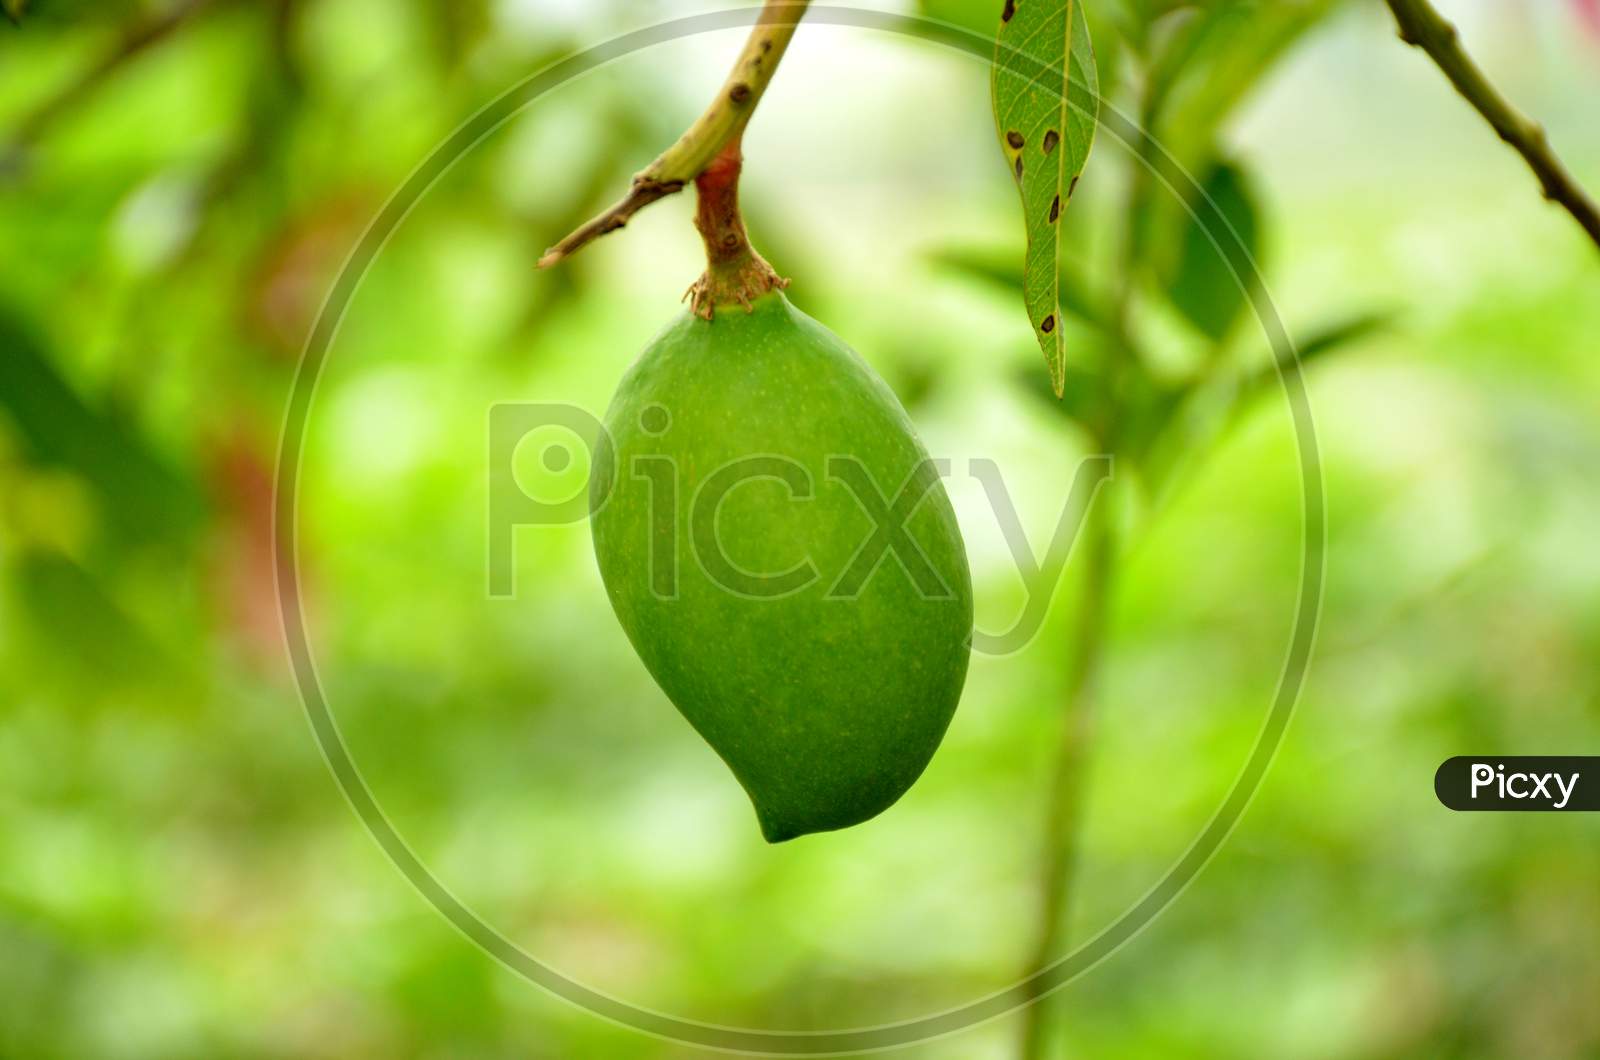 the ripe green mango with branch